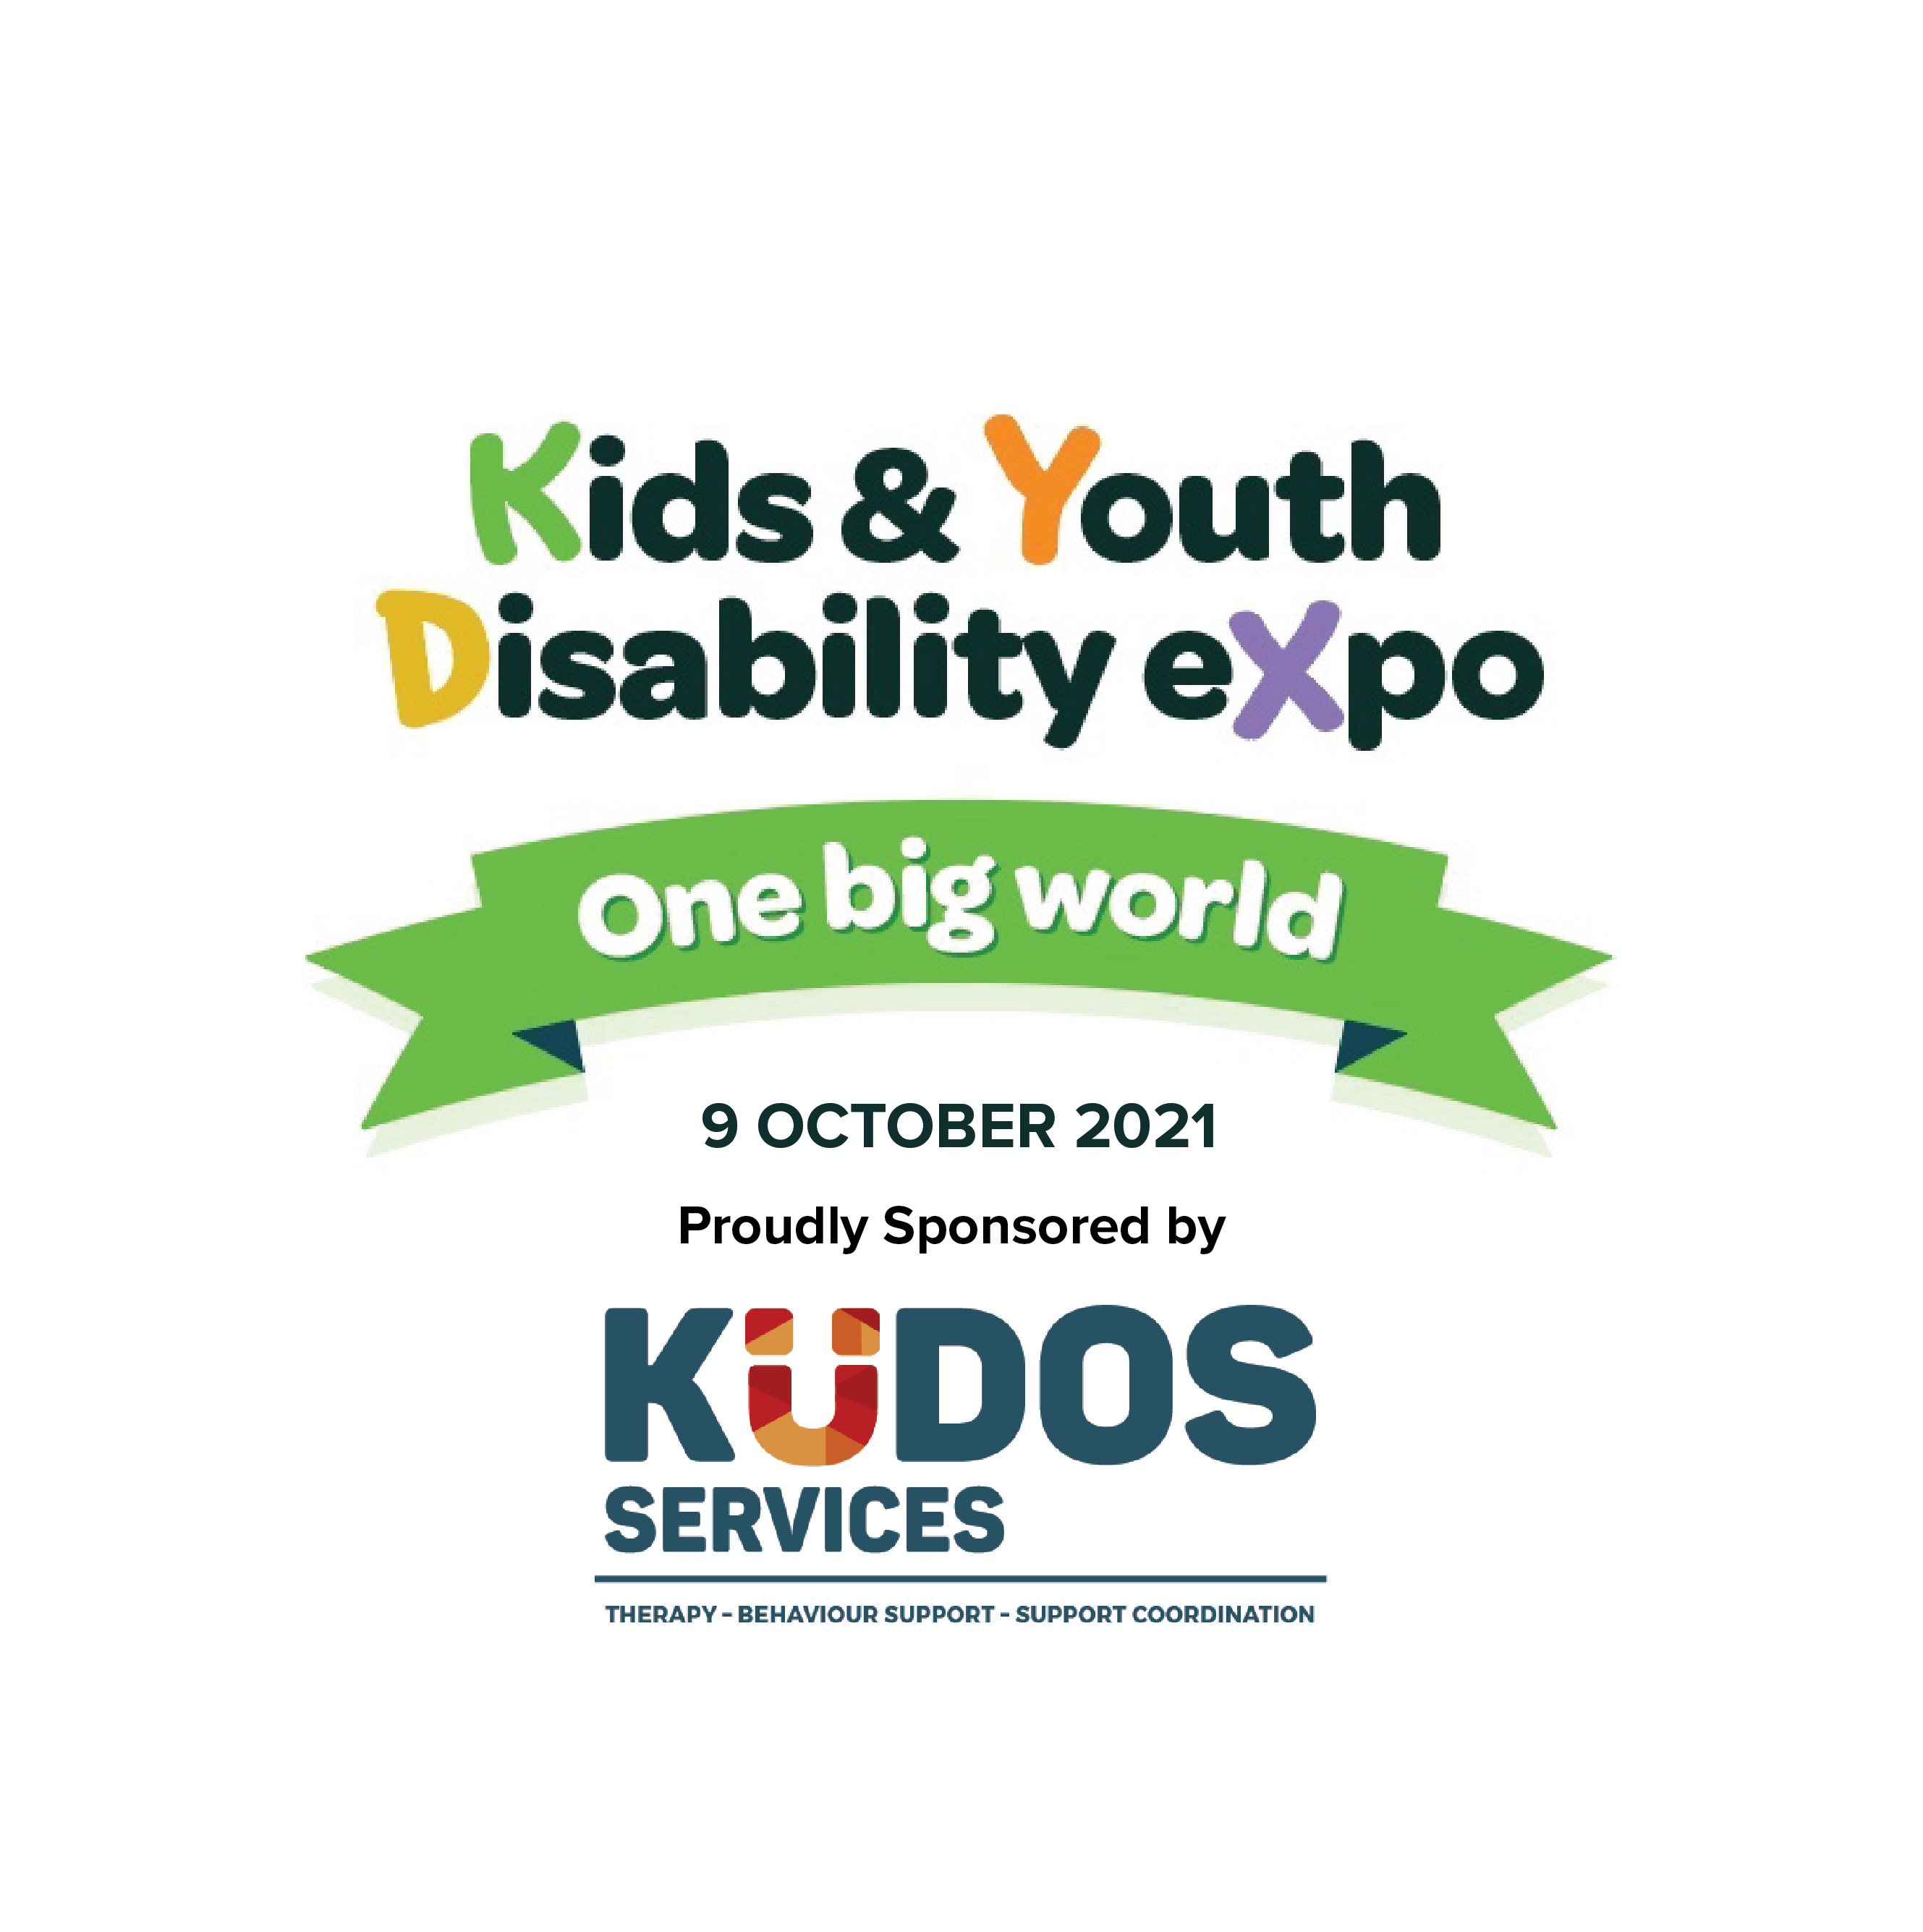 Kids & Youth Disability Expo - one big world poster. Date is for the 9th of October 2021. KUDOS Services; therapy, behaviour support and support coordination 